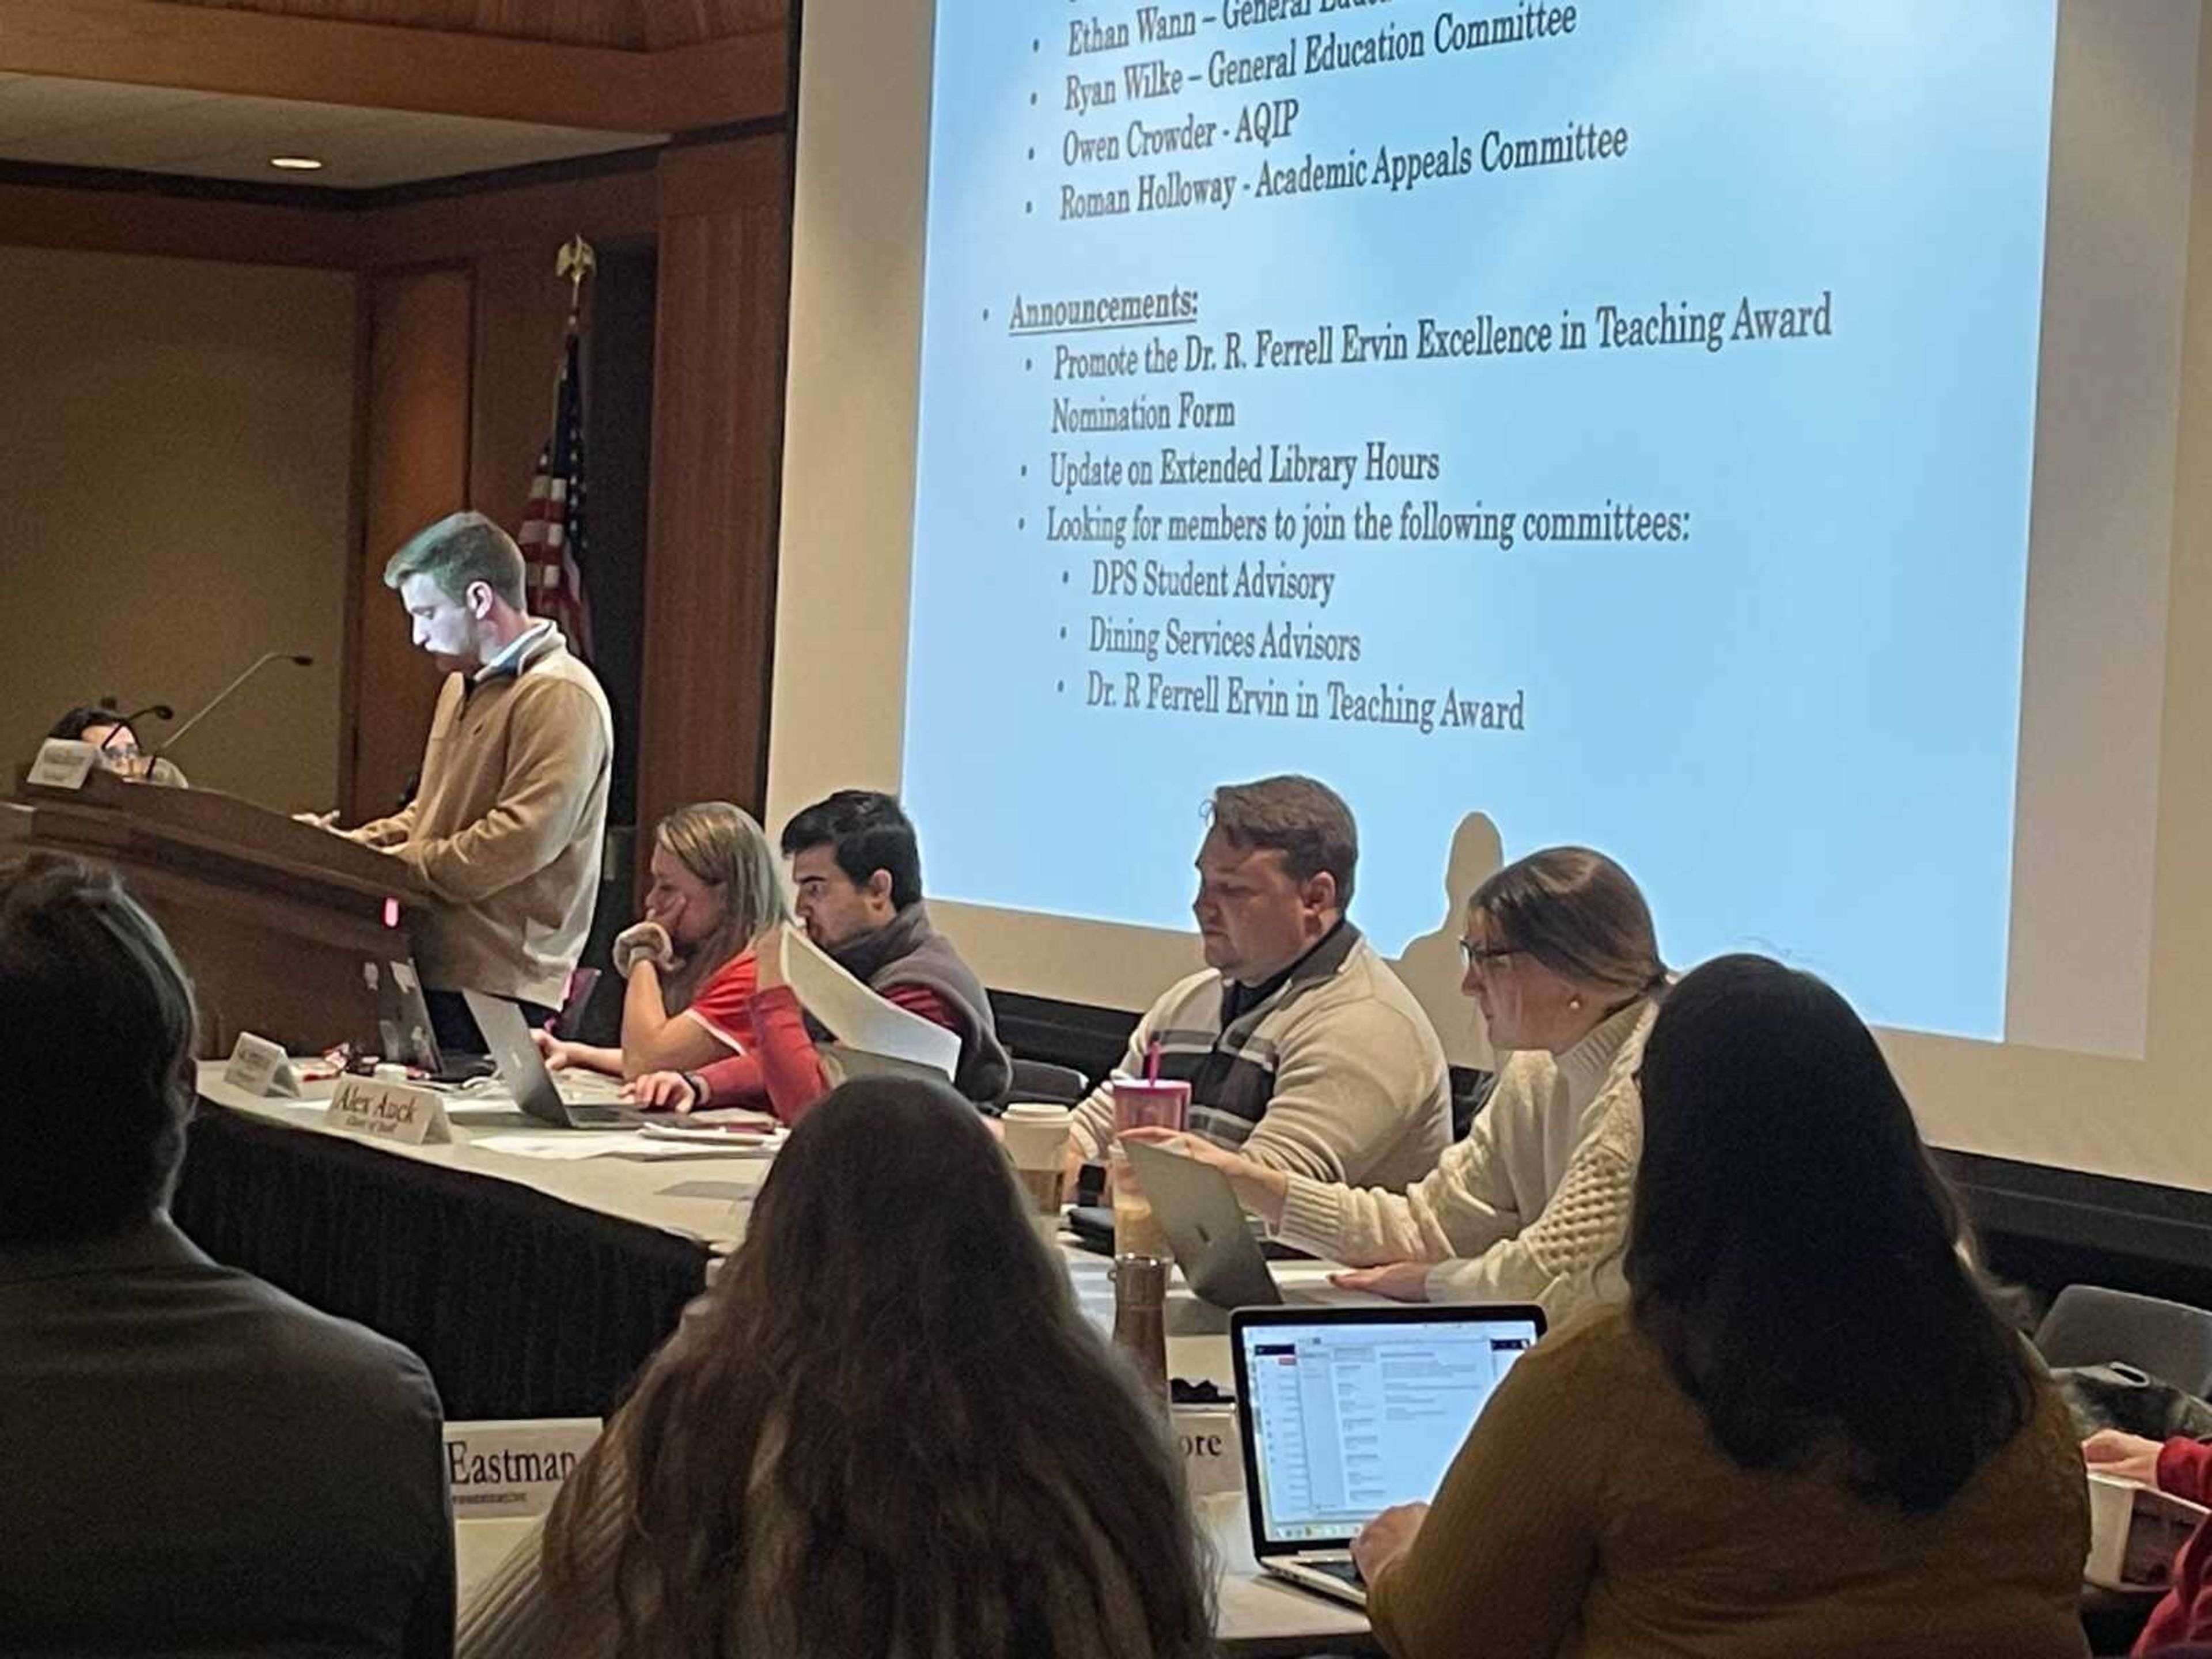 SGA discusses sexual assault education, DPS Student Advisory Committee